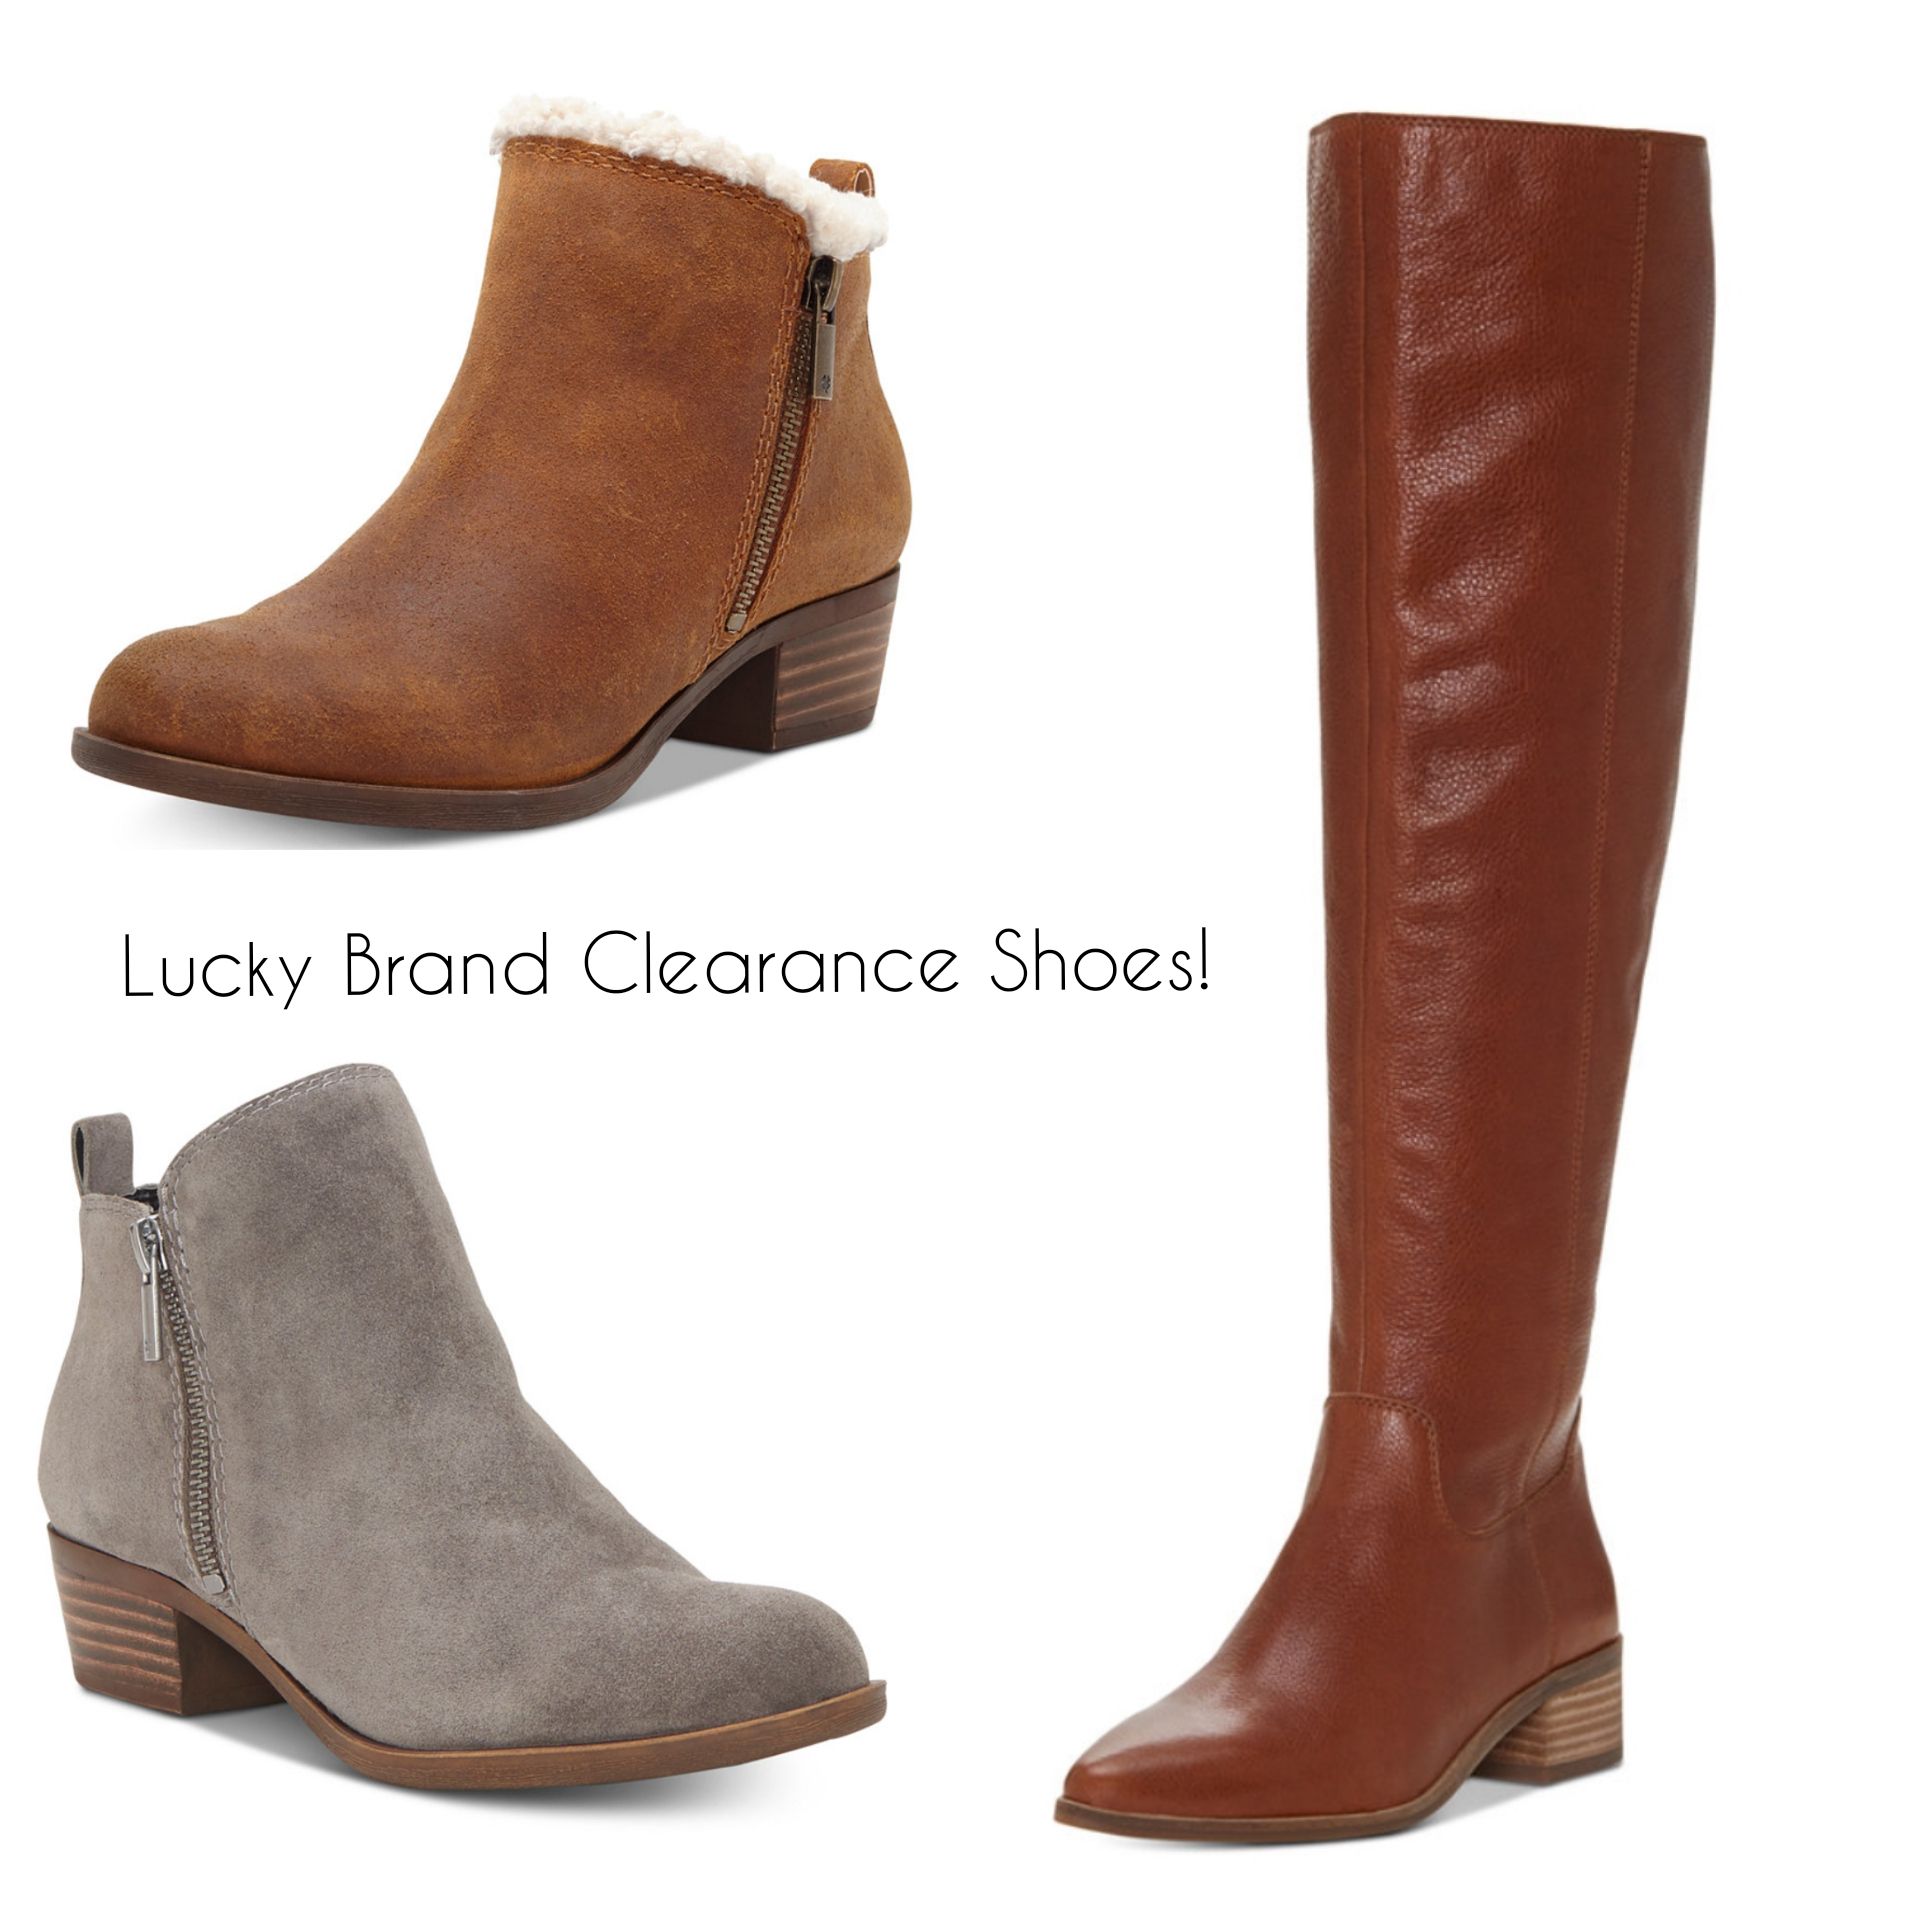 lucky brand shoes clearance